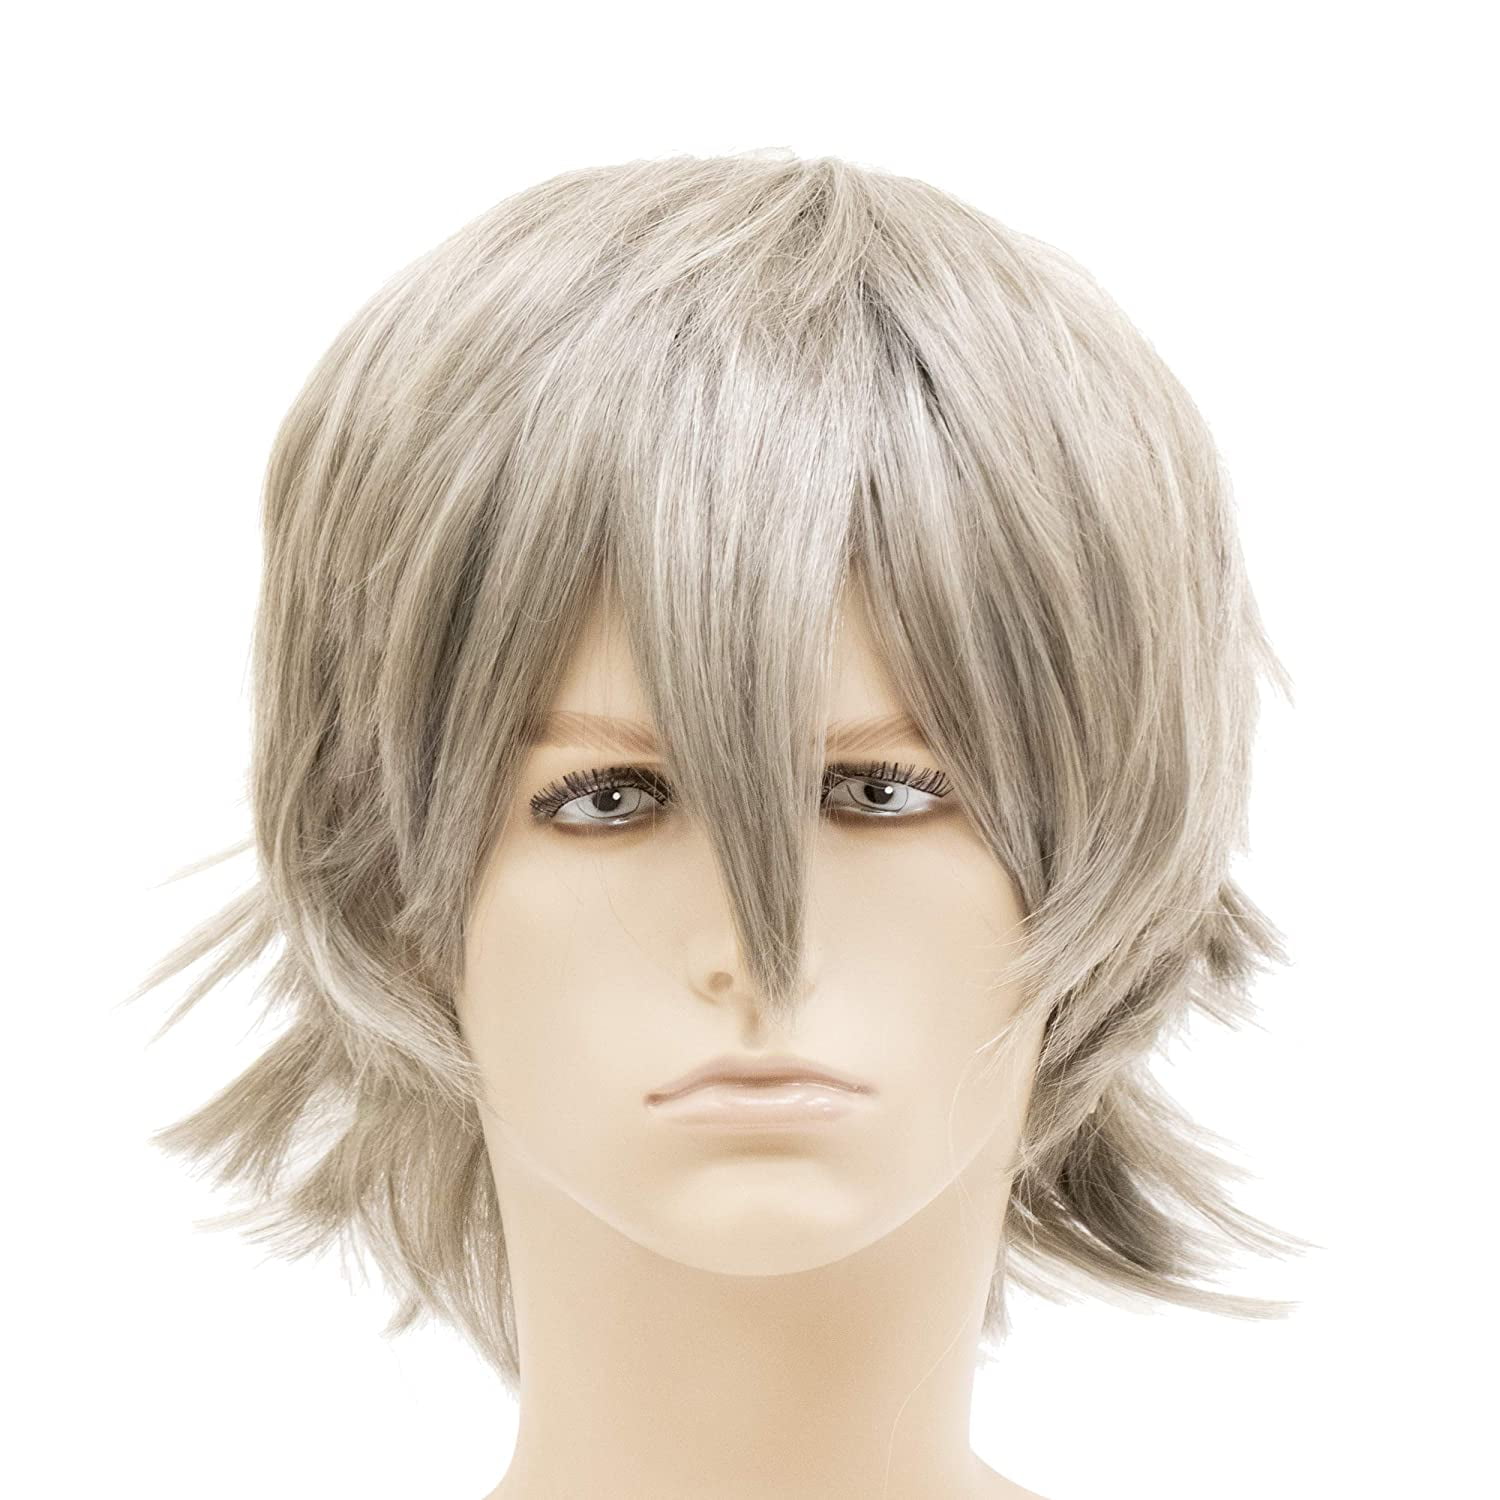 Cool Mens Boys Short Straight Hair Party Male Heat Resistant Cosplay Wig Silver Grey 